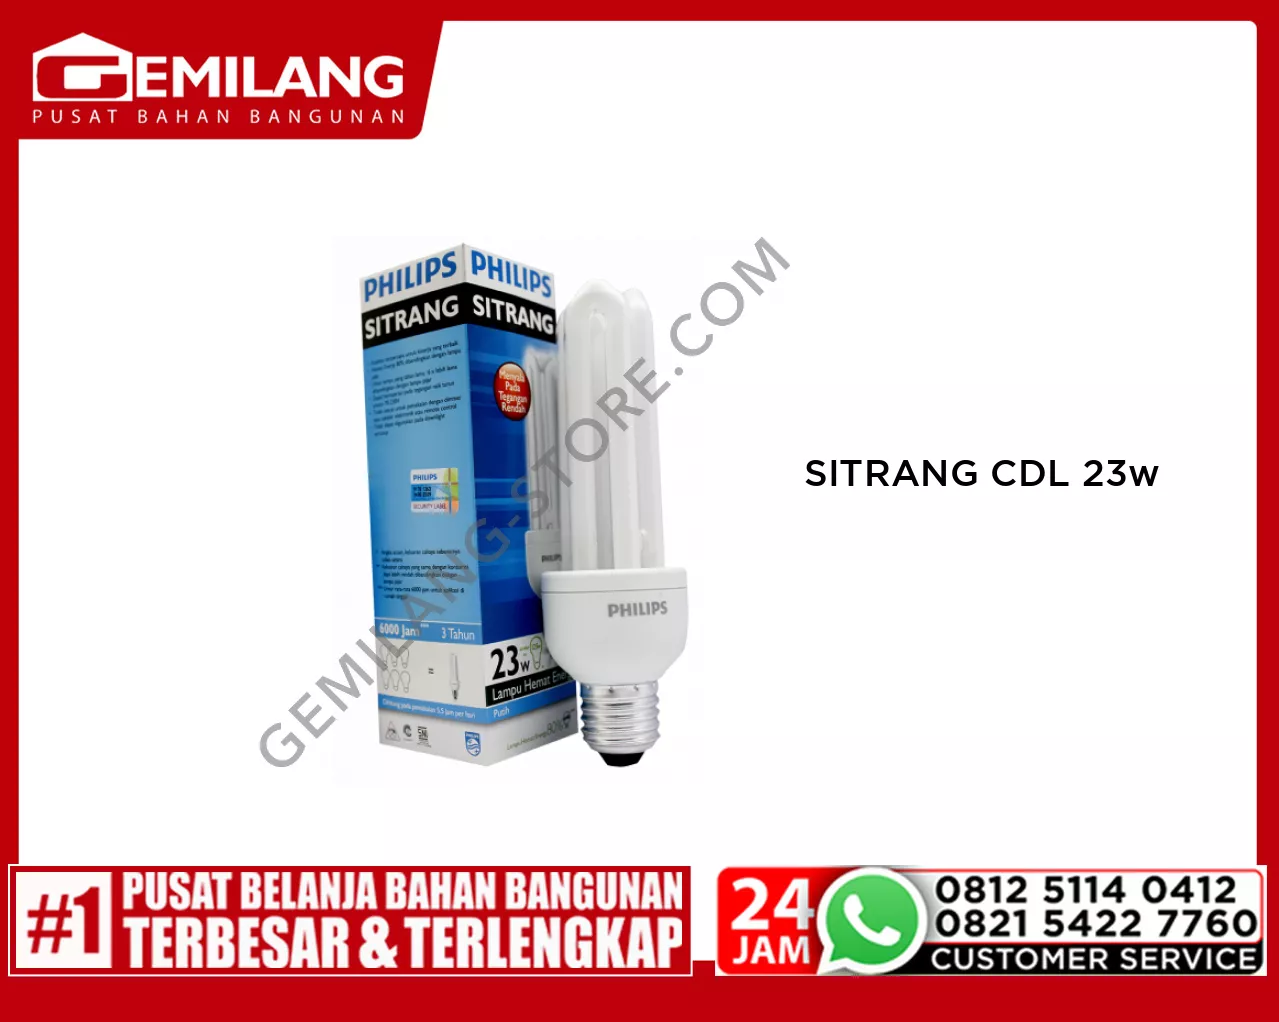 PHILIPS SITRANG CDL 23w